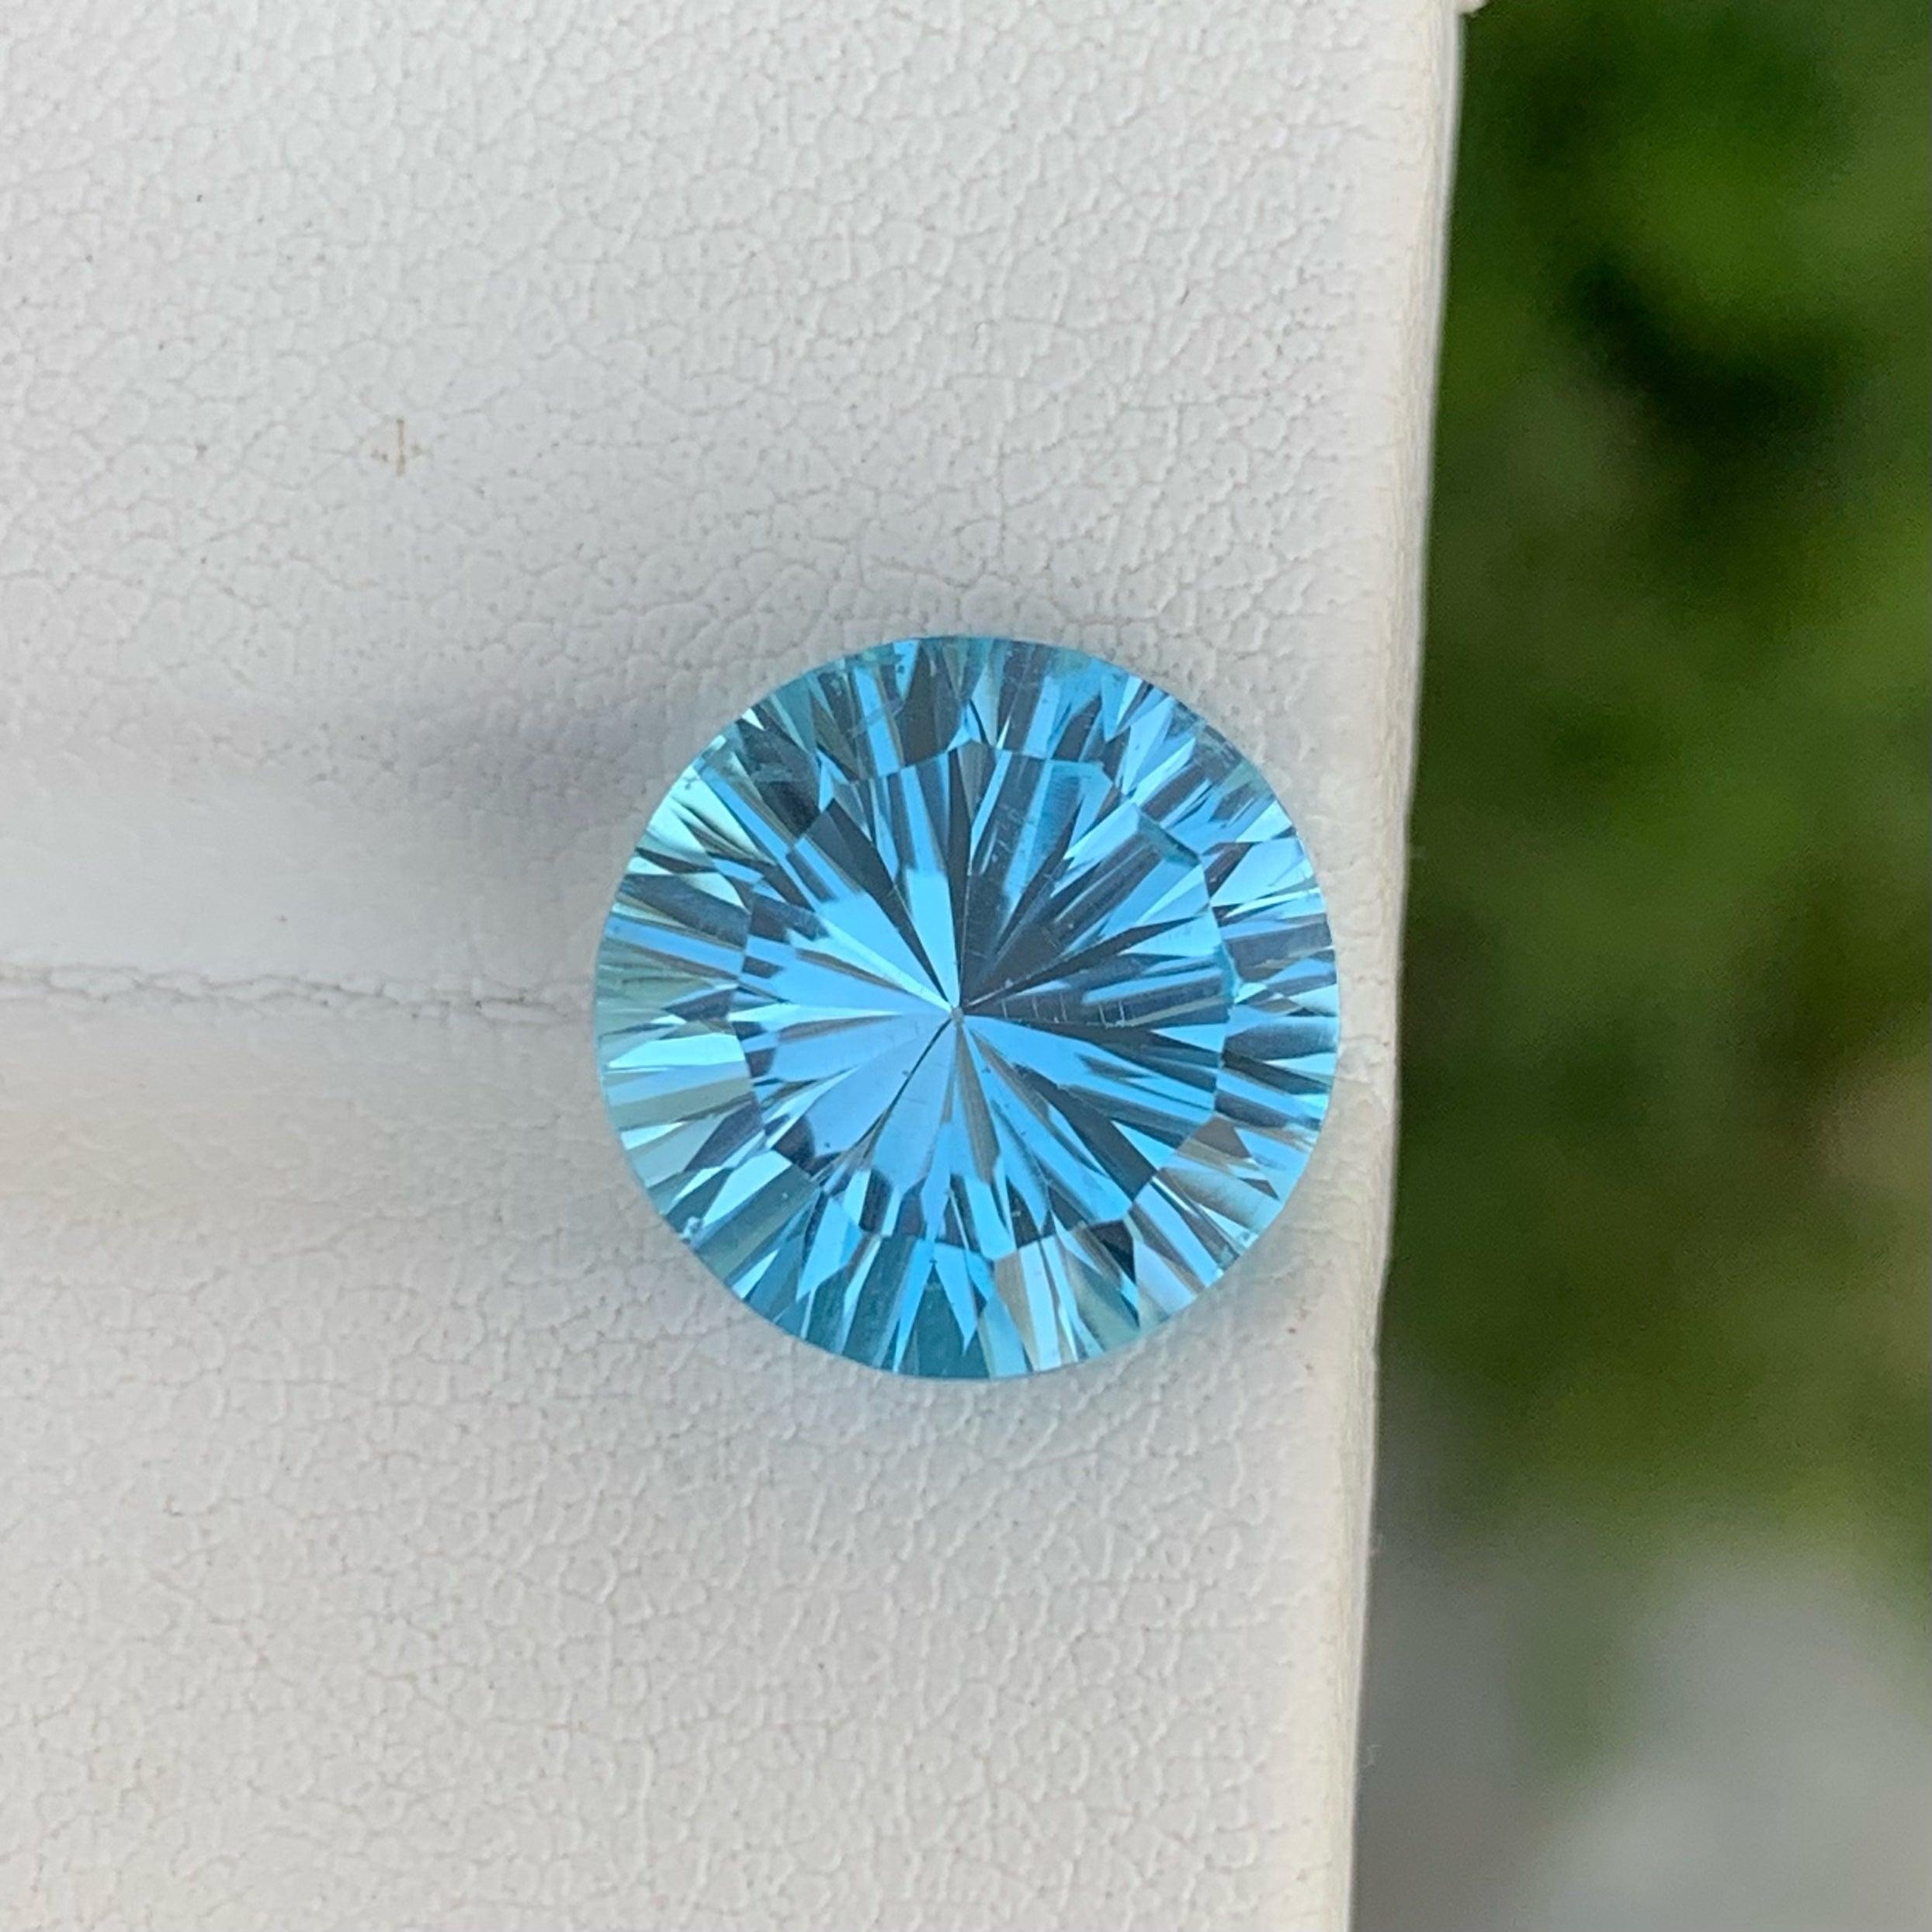 Fantastic Natural Swiss Blue Topaz Gemstone, available For Sale At Wholesale Price Natural High Quality 7.35 Carats Loupe Clean Clarity Heated Topaz From Africa. 

Product Information:
GEMSTONE NAME: Fantastic Natural Swiss Blue Topaz